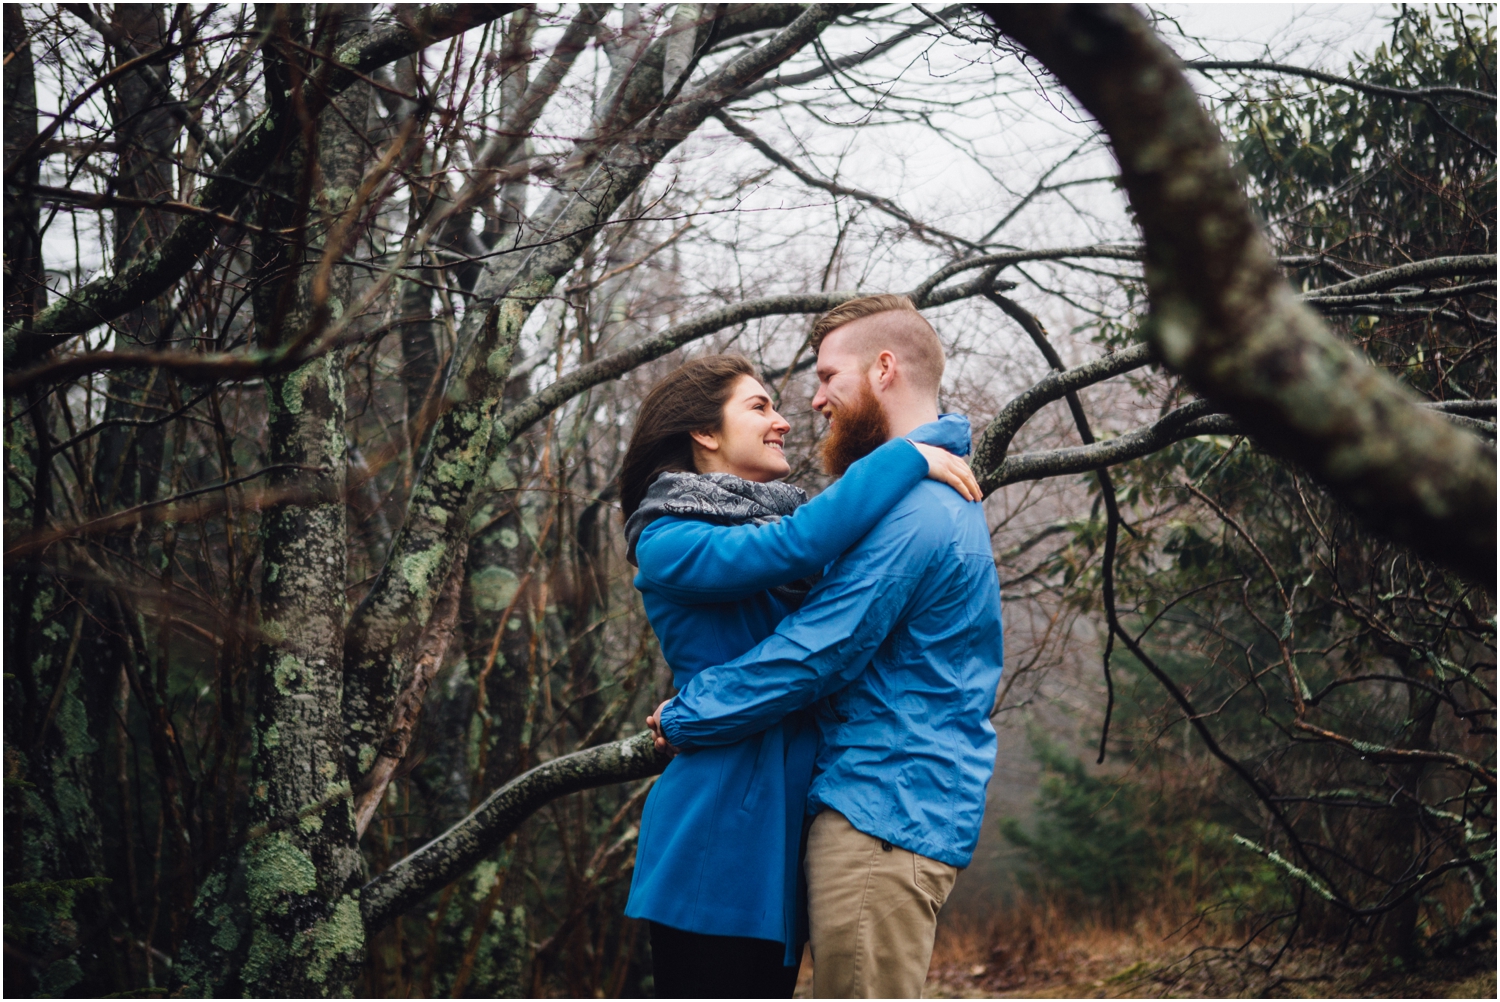 katy-sergent-photography-grayson-highlands-engagement-session-mouth-of-wilson-virginia-damascus-appalachian-trail-tennessee-wedding-elopement_0002.jpg